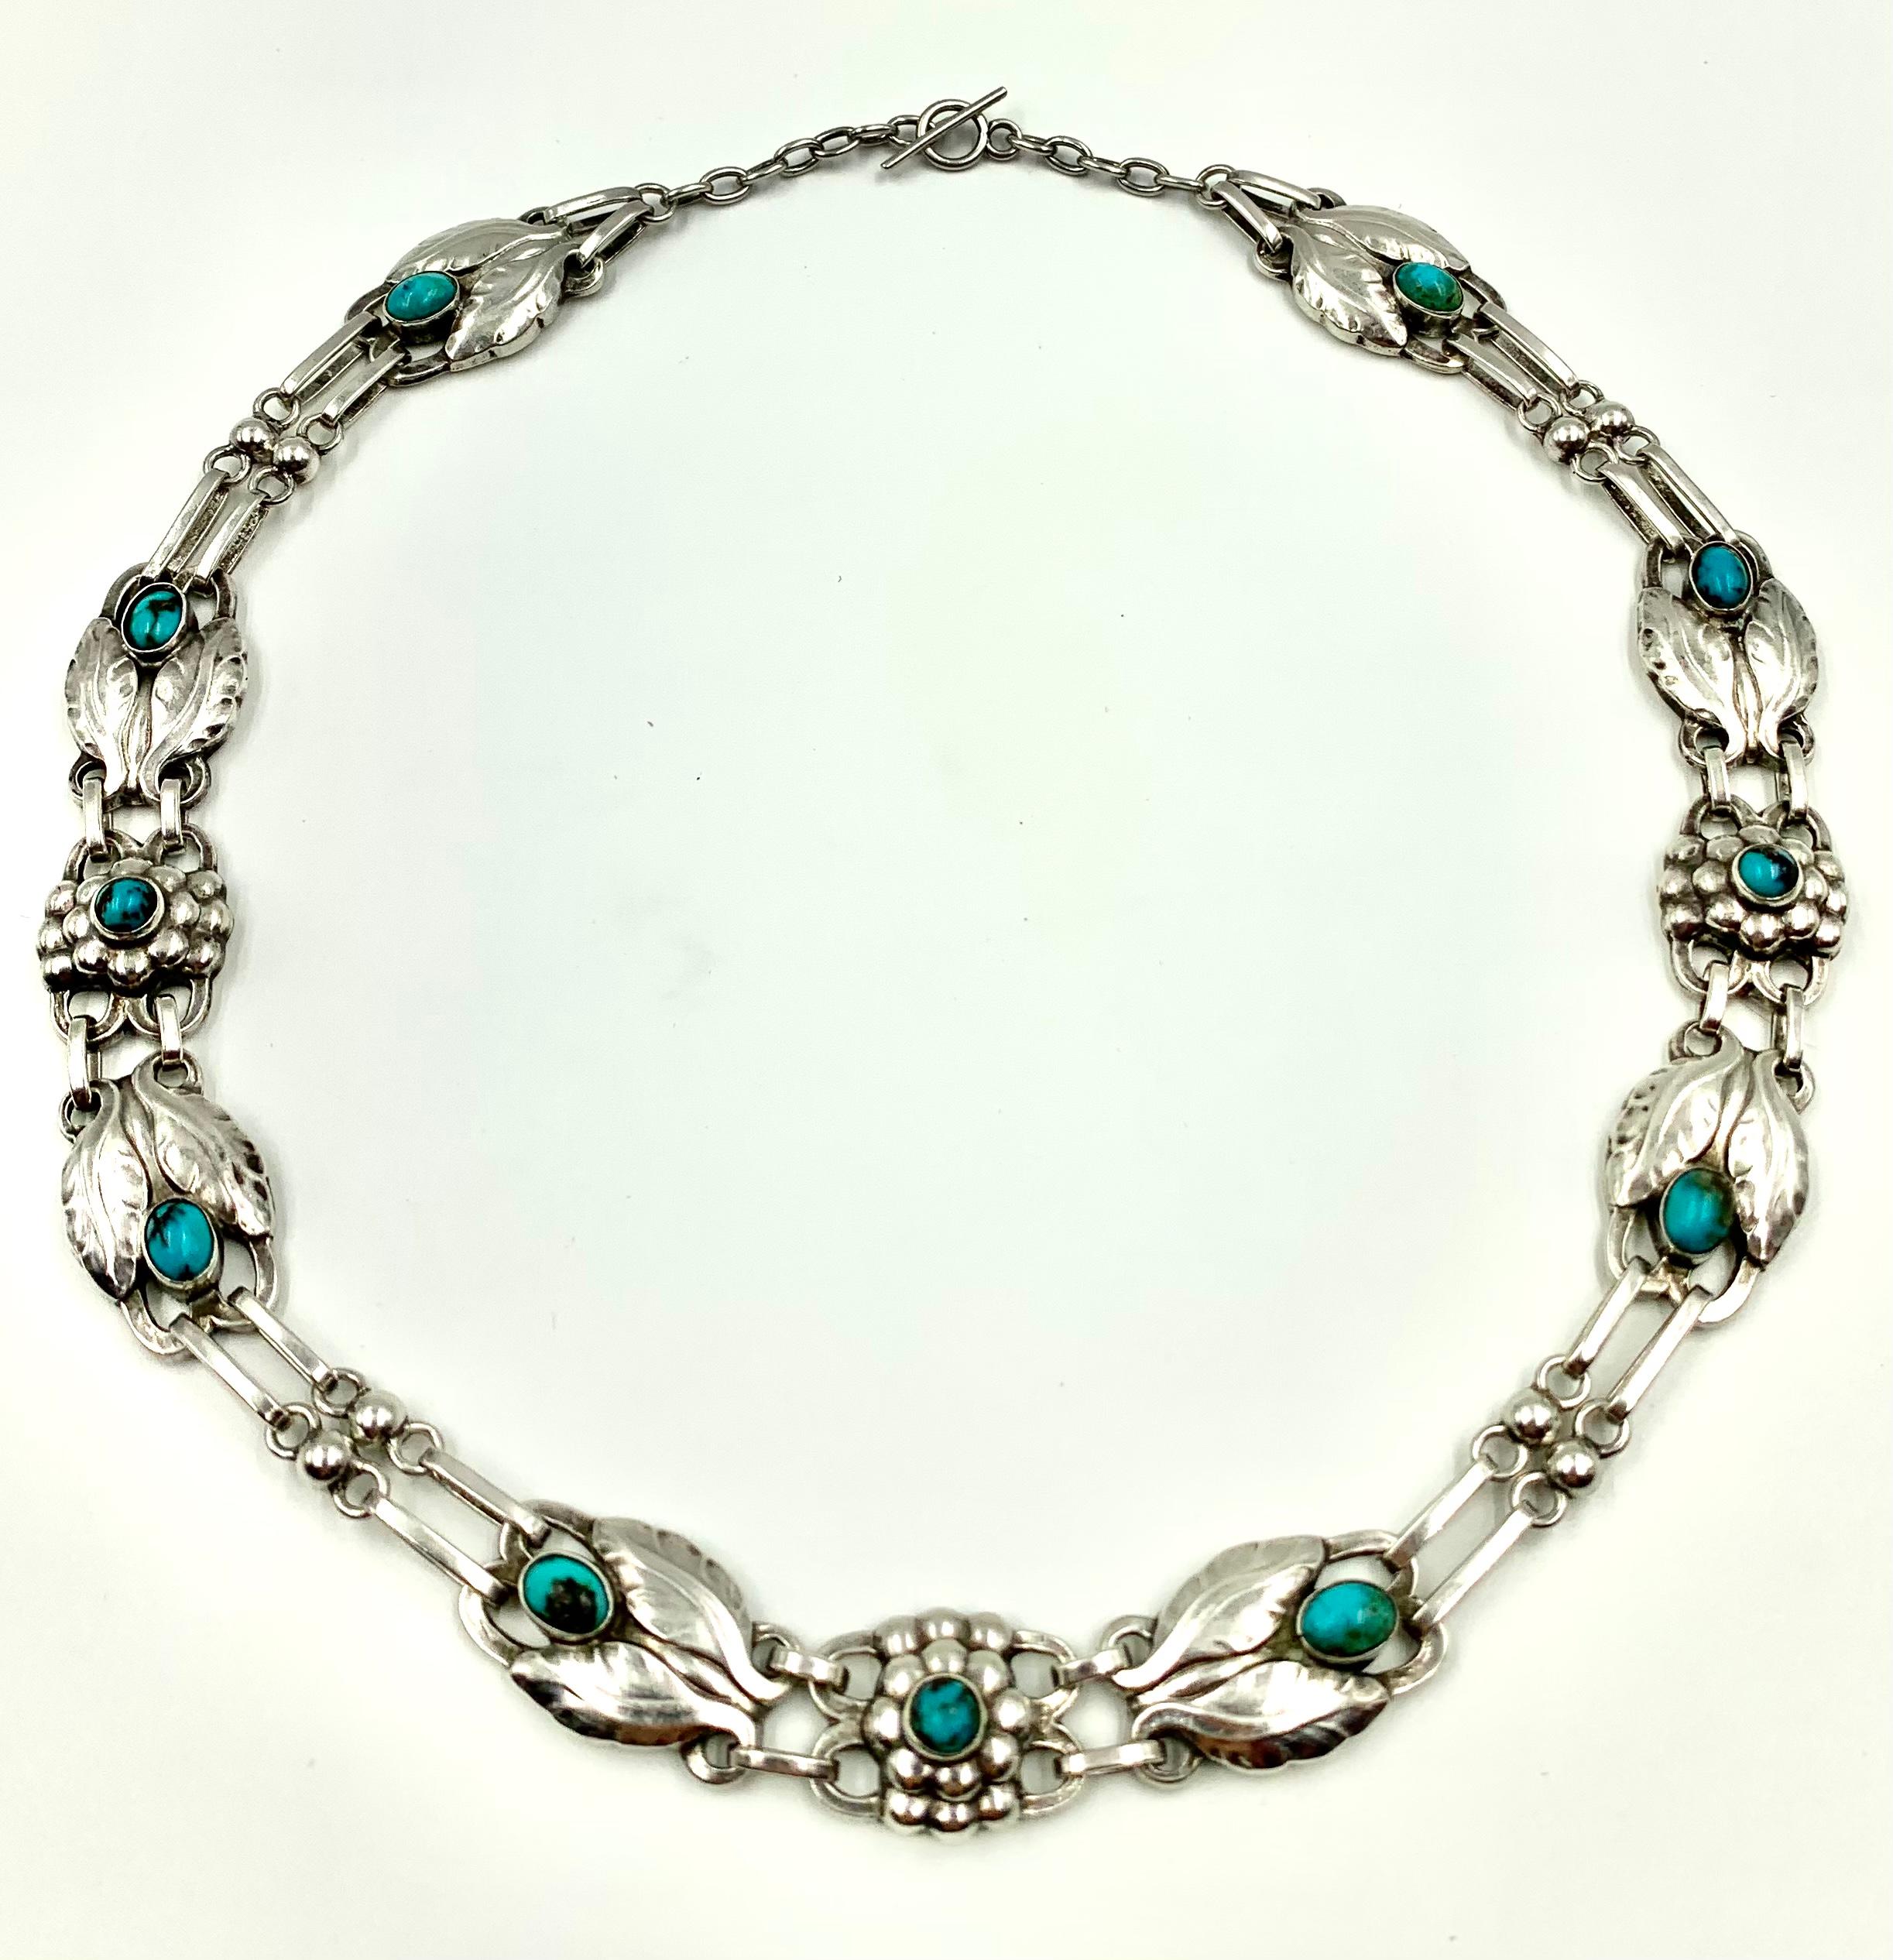 Rare Early Georg Jensen Cabochon Turquoise and Silver #1 Necklace, 1910-1925 In Good Condition For Sale In New York, NY